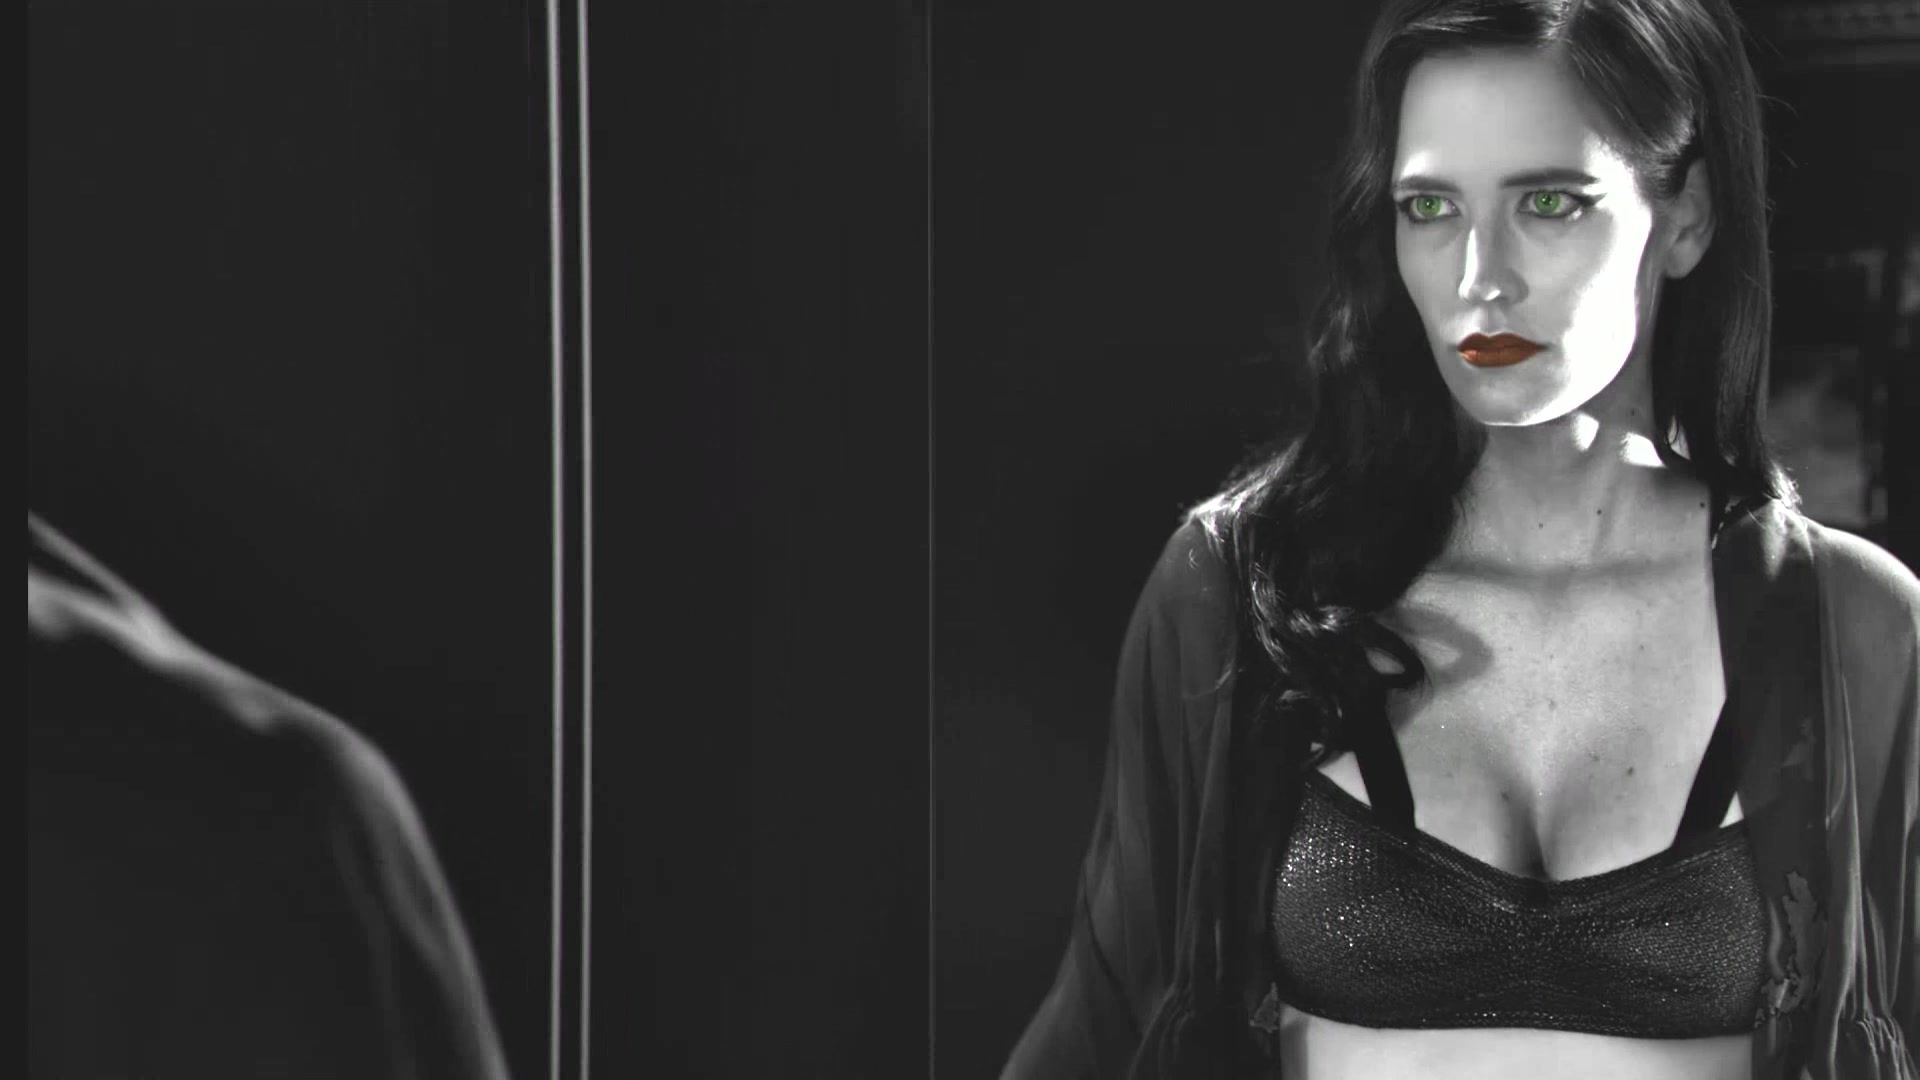 X-Angels Eva Green - Sin City 2 - A Dame To Kill For (2014) Full HD 1080 BR (Sex, Nude, FF) Dick Sucking - 2